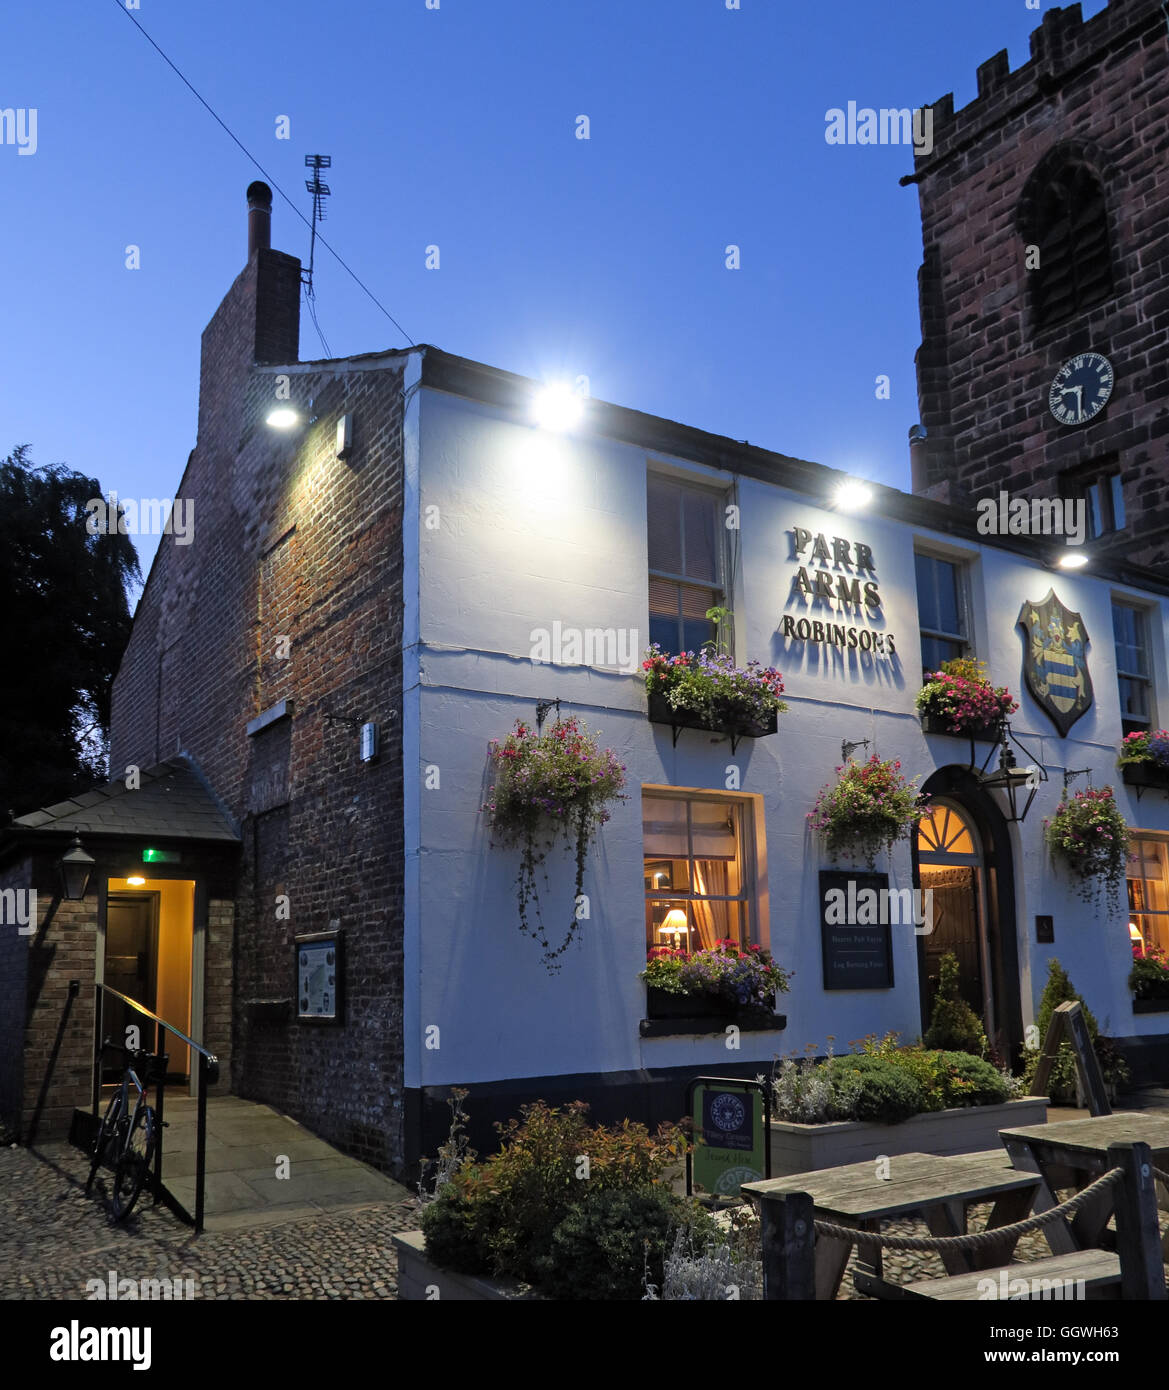 Parr Arms Pub,Grappenhall Warrington,Village,Cheshire, Angleterre, UK at night Banque D'Images